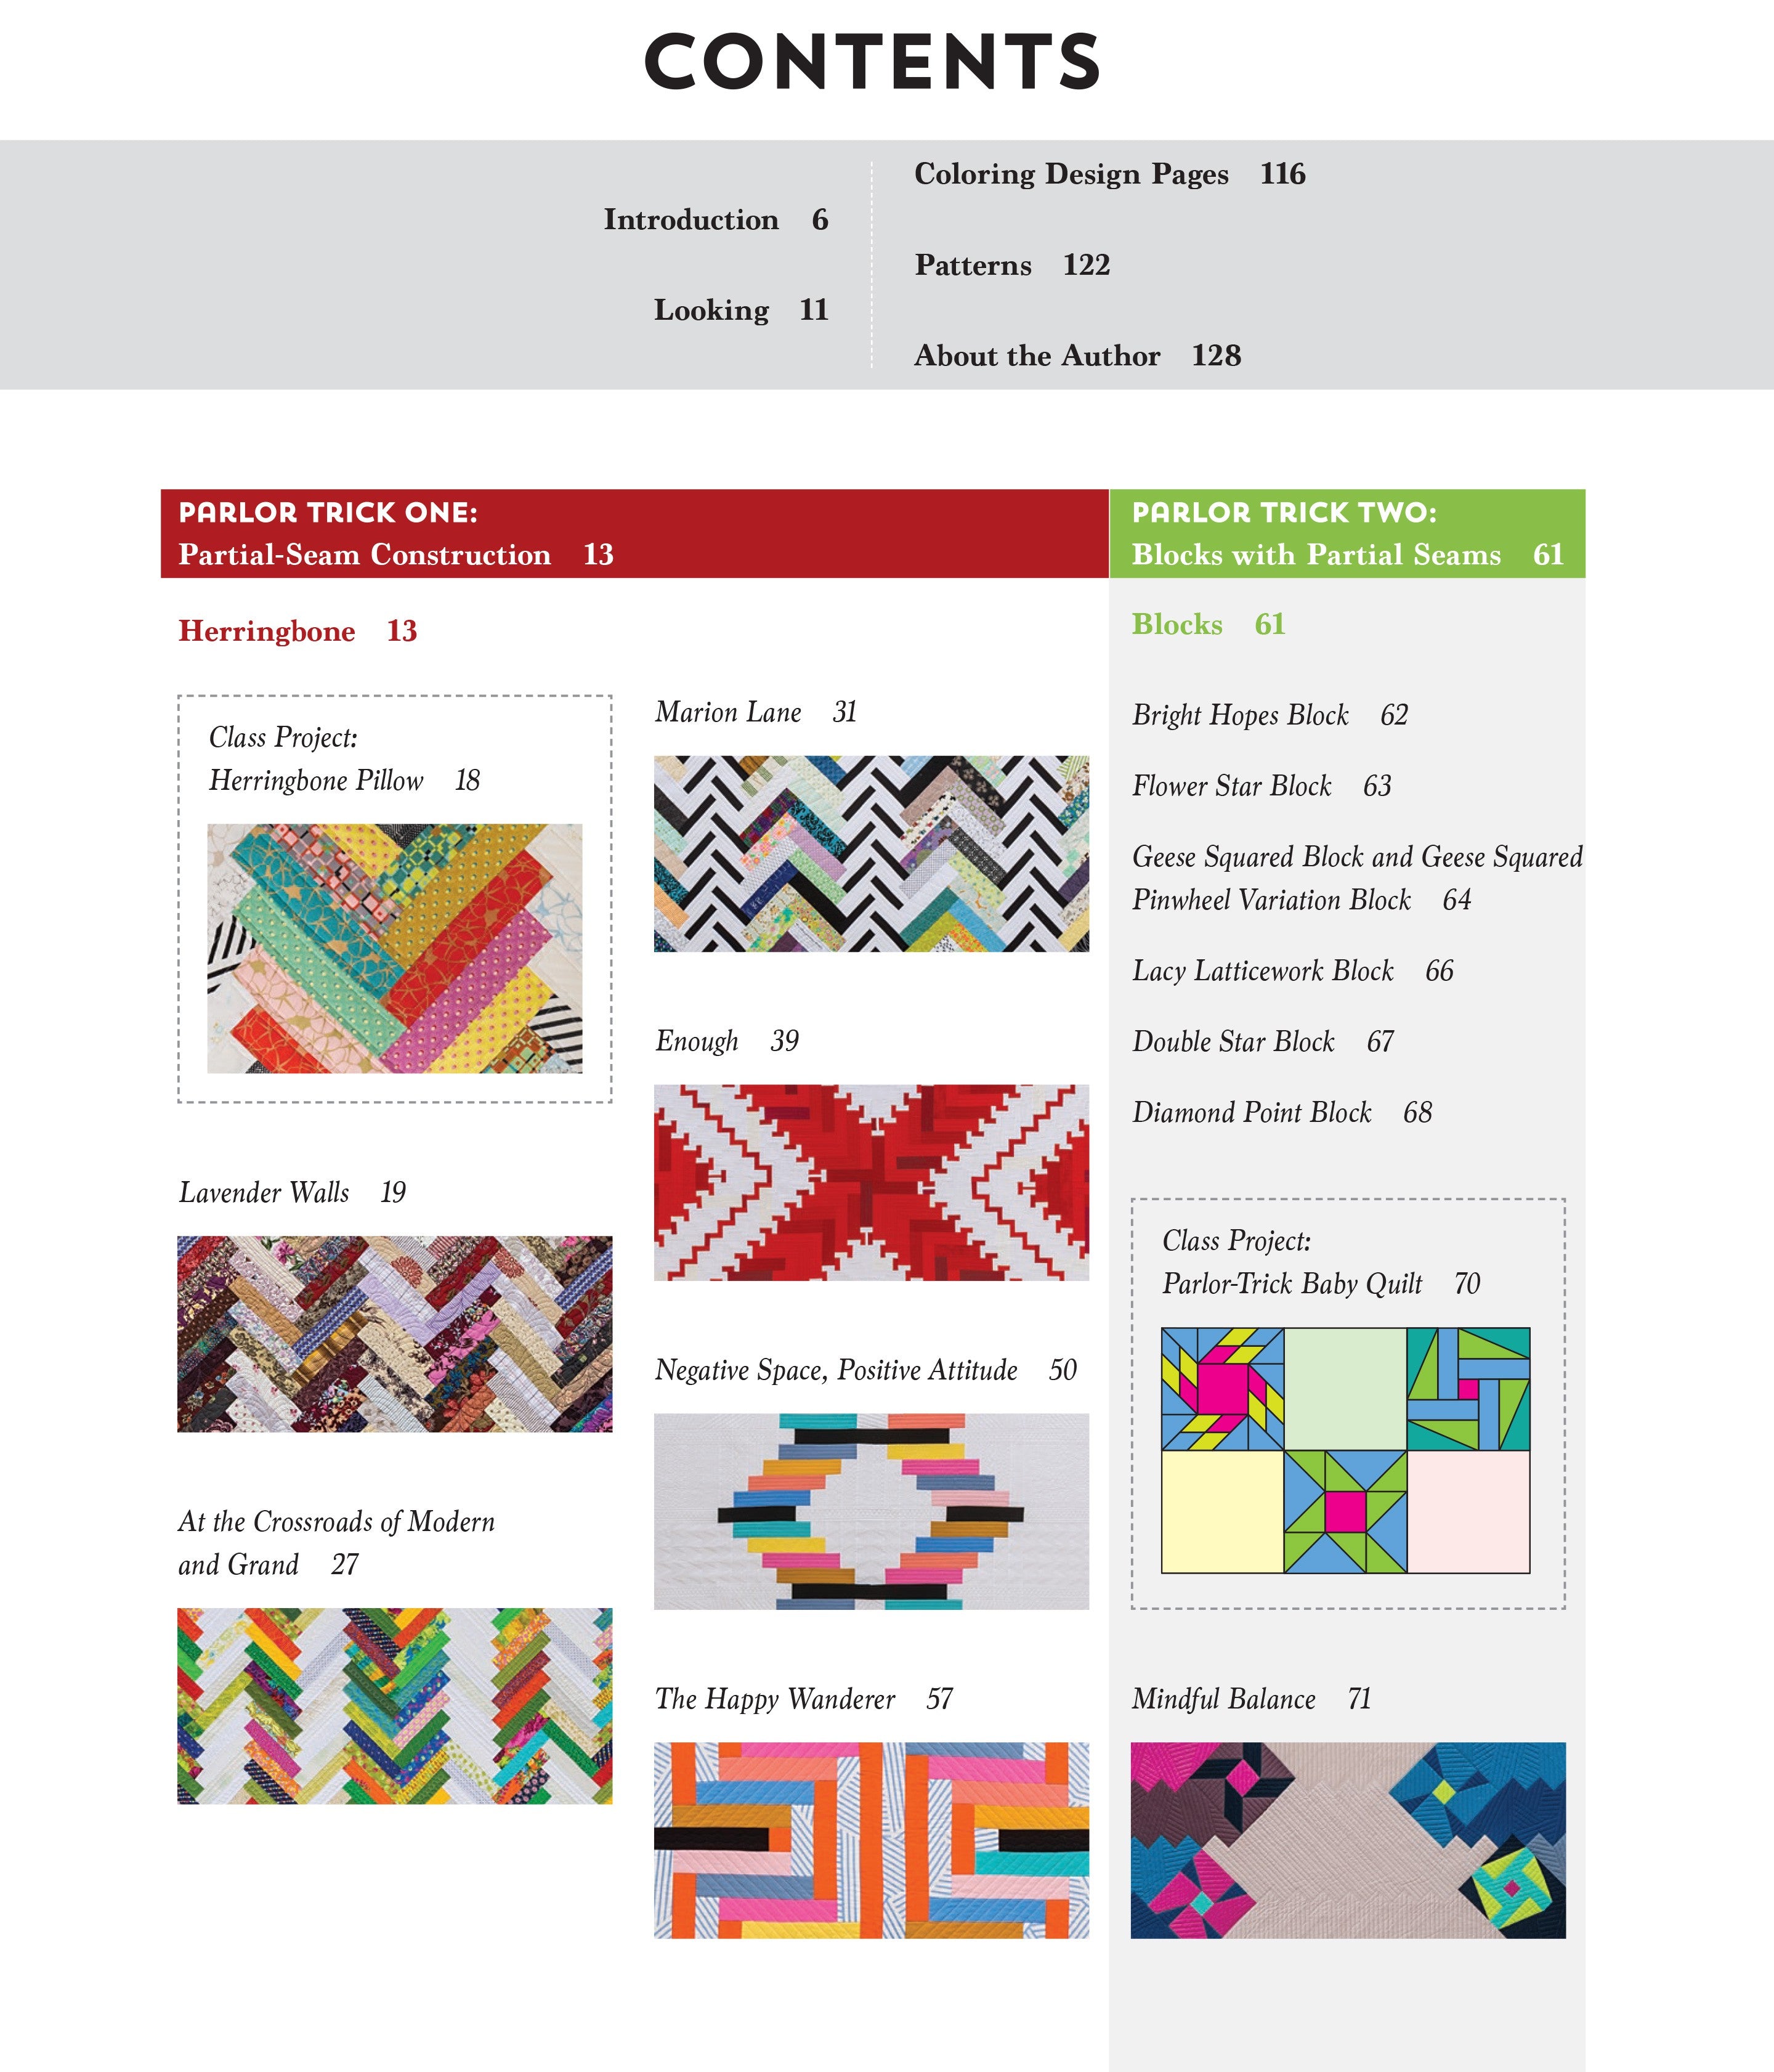 Modern Quilt Magic Quilt Pattern Book by Victoria Findlay Wolfe for Stash Books